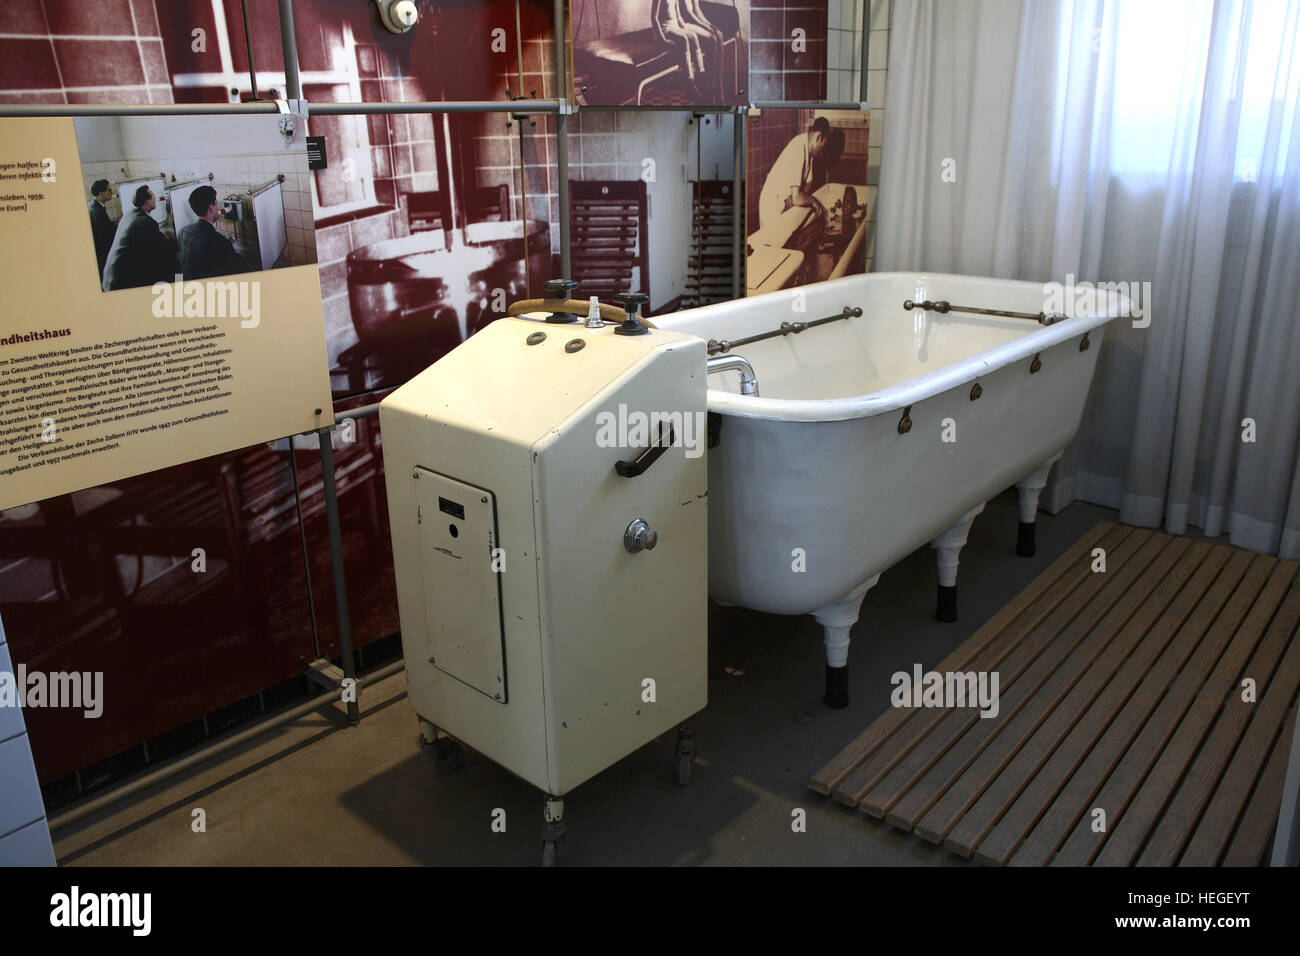 Germany, Ruhr Area, Dortmund, Westphalian industry museum Zeche Zollern in the district Boevinghausen, bath at the health house. Stock Photo